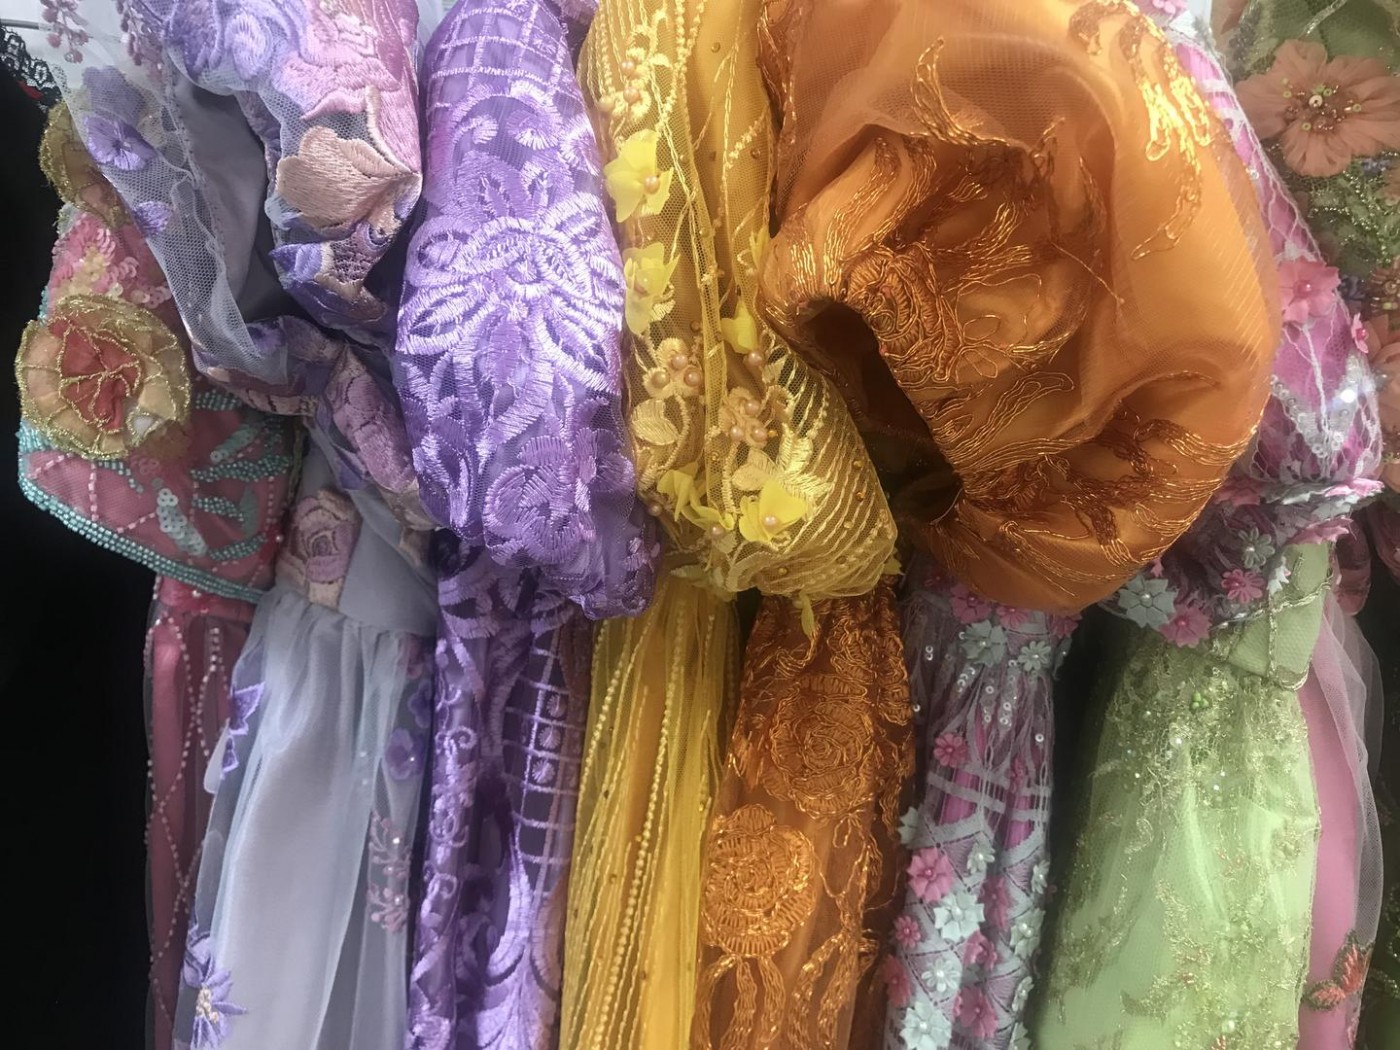 Behind the scenes in the costume warehouse. Credit: Netflix 2020.